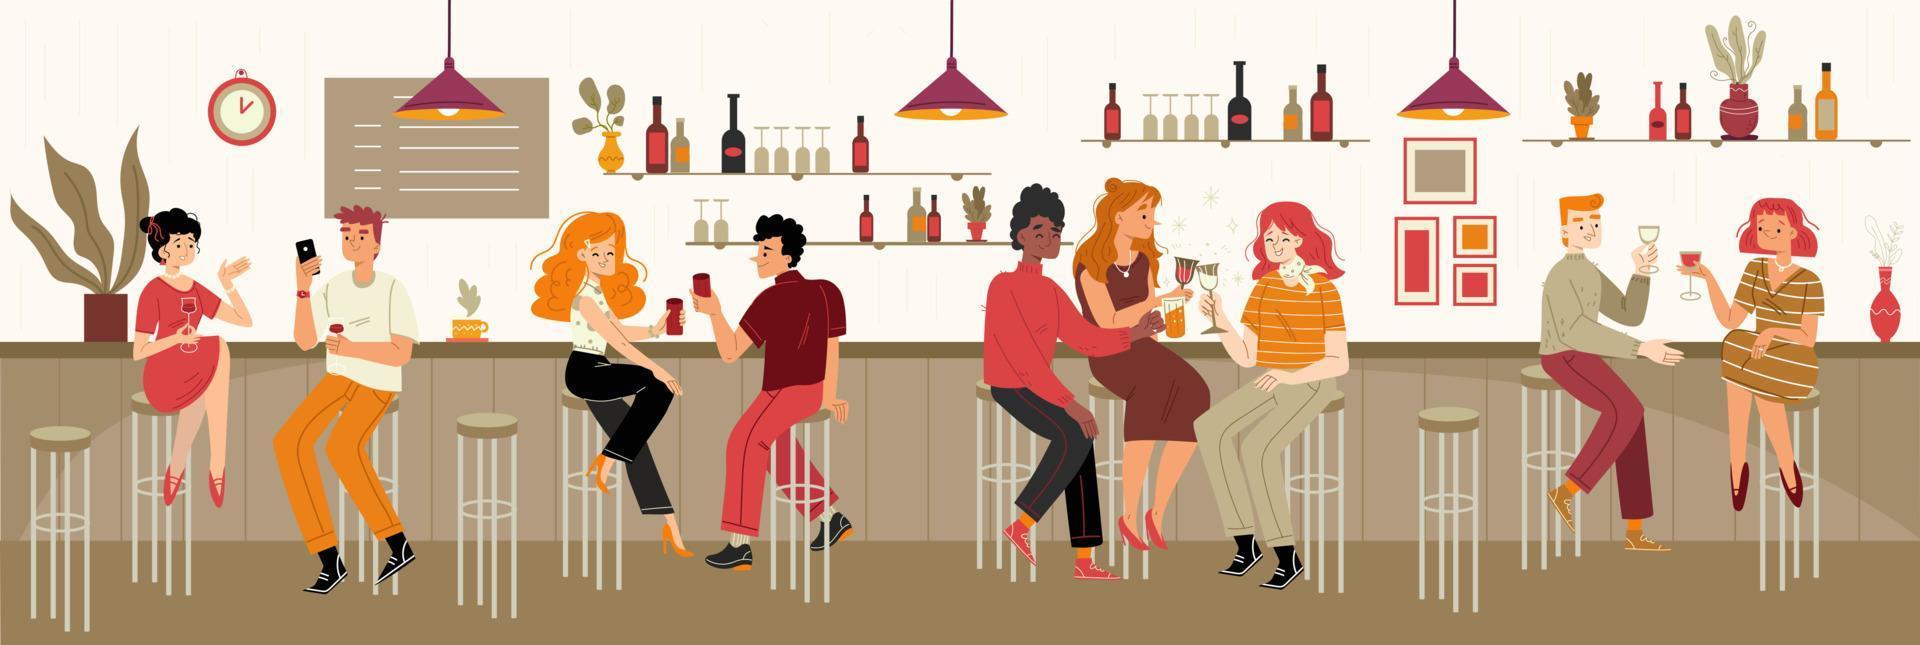 Diverse people drink alcohol in bar vector